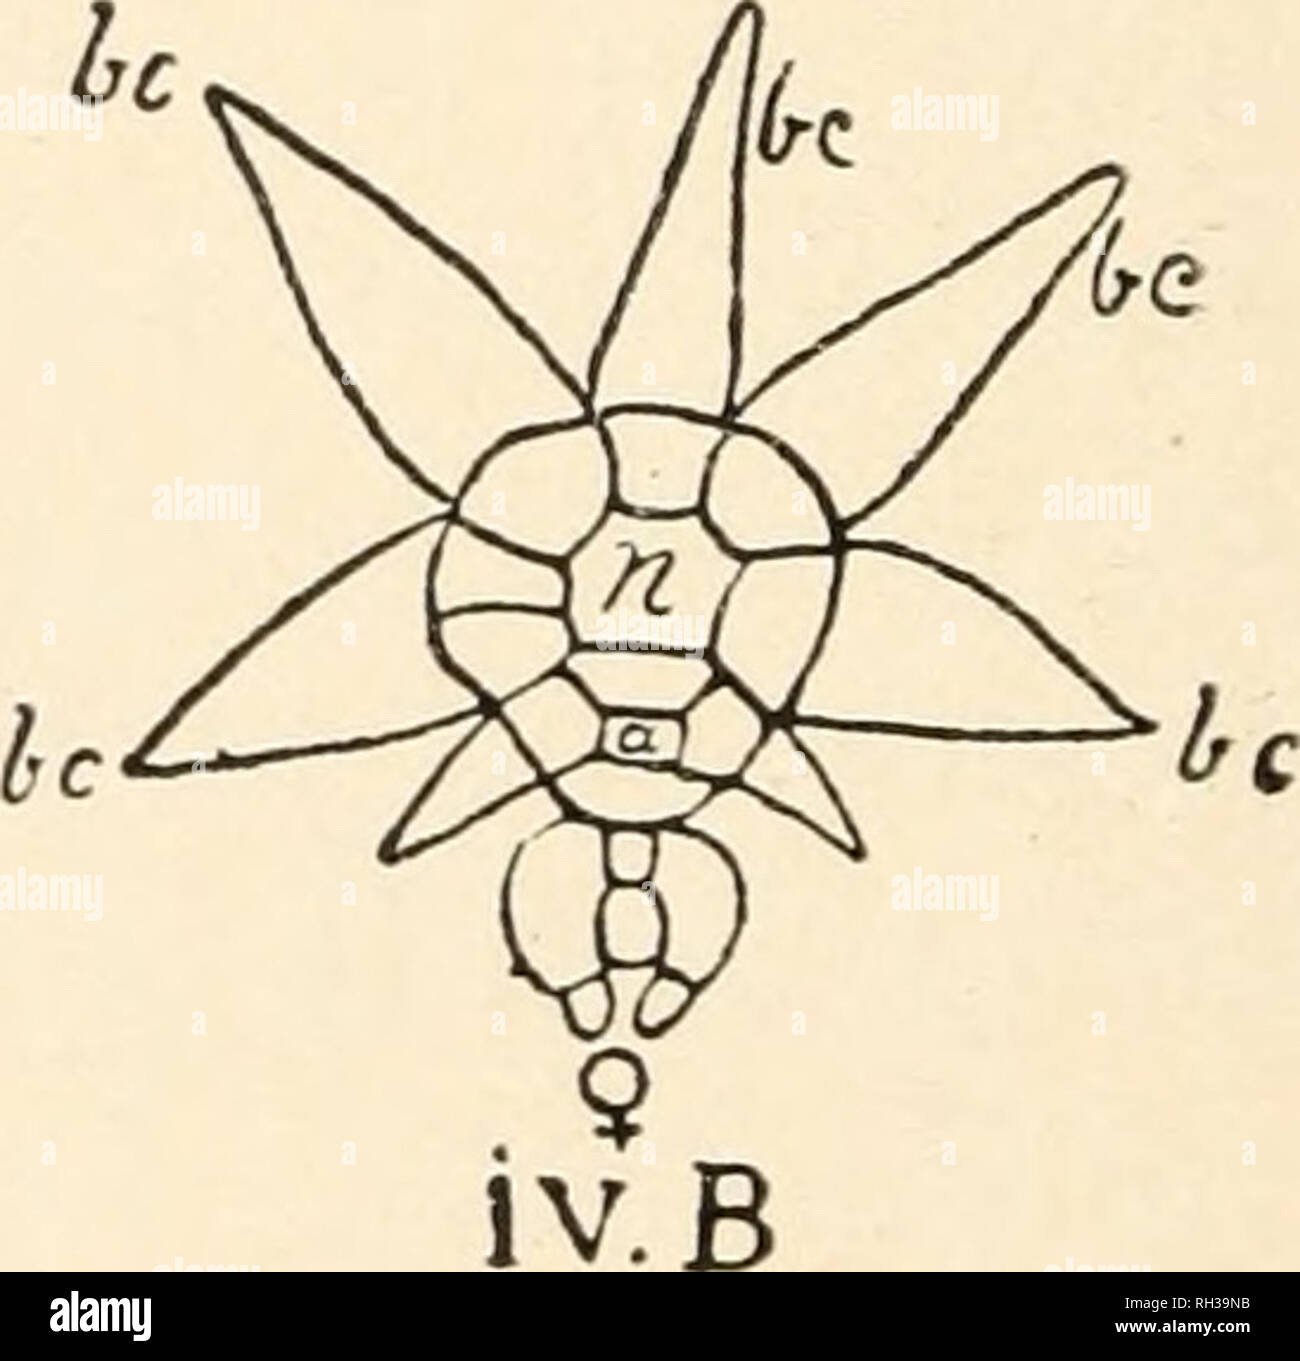 . The British Charophyta. Characeae -- Great Britain. lii.B. FIG. 16.—Position of reproductive organs in several genera. &lt;J = antheridium, $ = oogonium in all figures, i. Nitella flexilis (after Sachs): pr, apex of primary ray; sr, bases of two secondary rays. ii. Tolypella glomerata (after Migula) : pr, primary ray; sr, secondary lateral rays; tr, terminal ray. iii. Lychnothamnus barbatus (after Braun) : A. Side view. B. Transverse section of branchlet-node (schematic)—n, central cell of node; be, bract-cells, iv. Lamprothamnium papulosum (after Braun): A. Vertical section of branchlet-nod Stock Photo